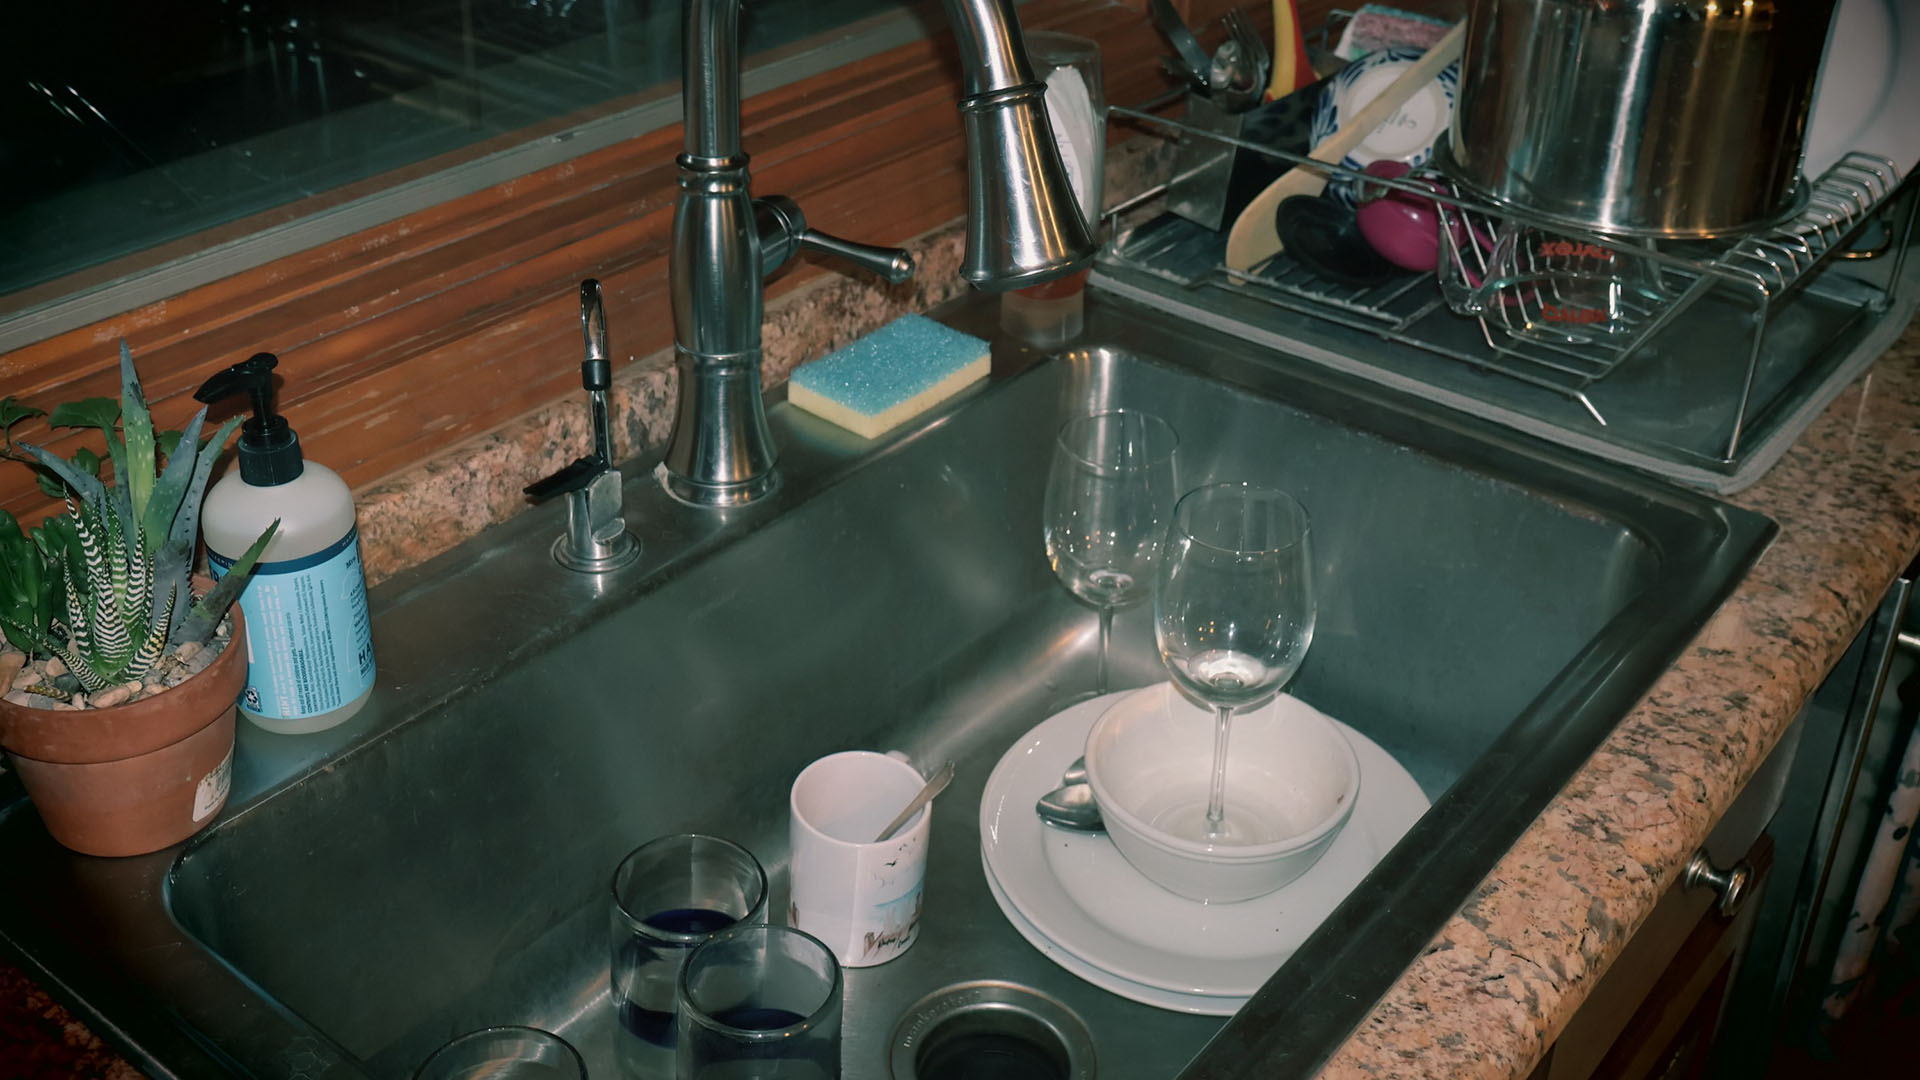 A sink of dirty dishes reflects a family scenario that may be familiar to many. The audio drama "Daughter Putting on Airs" was written by Alejandro Canelos,